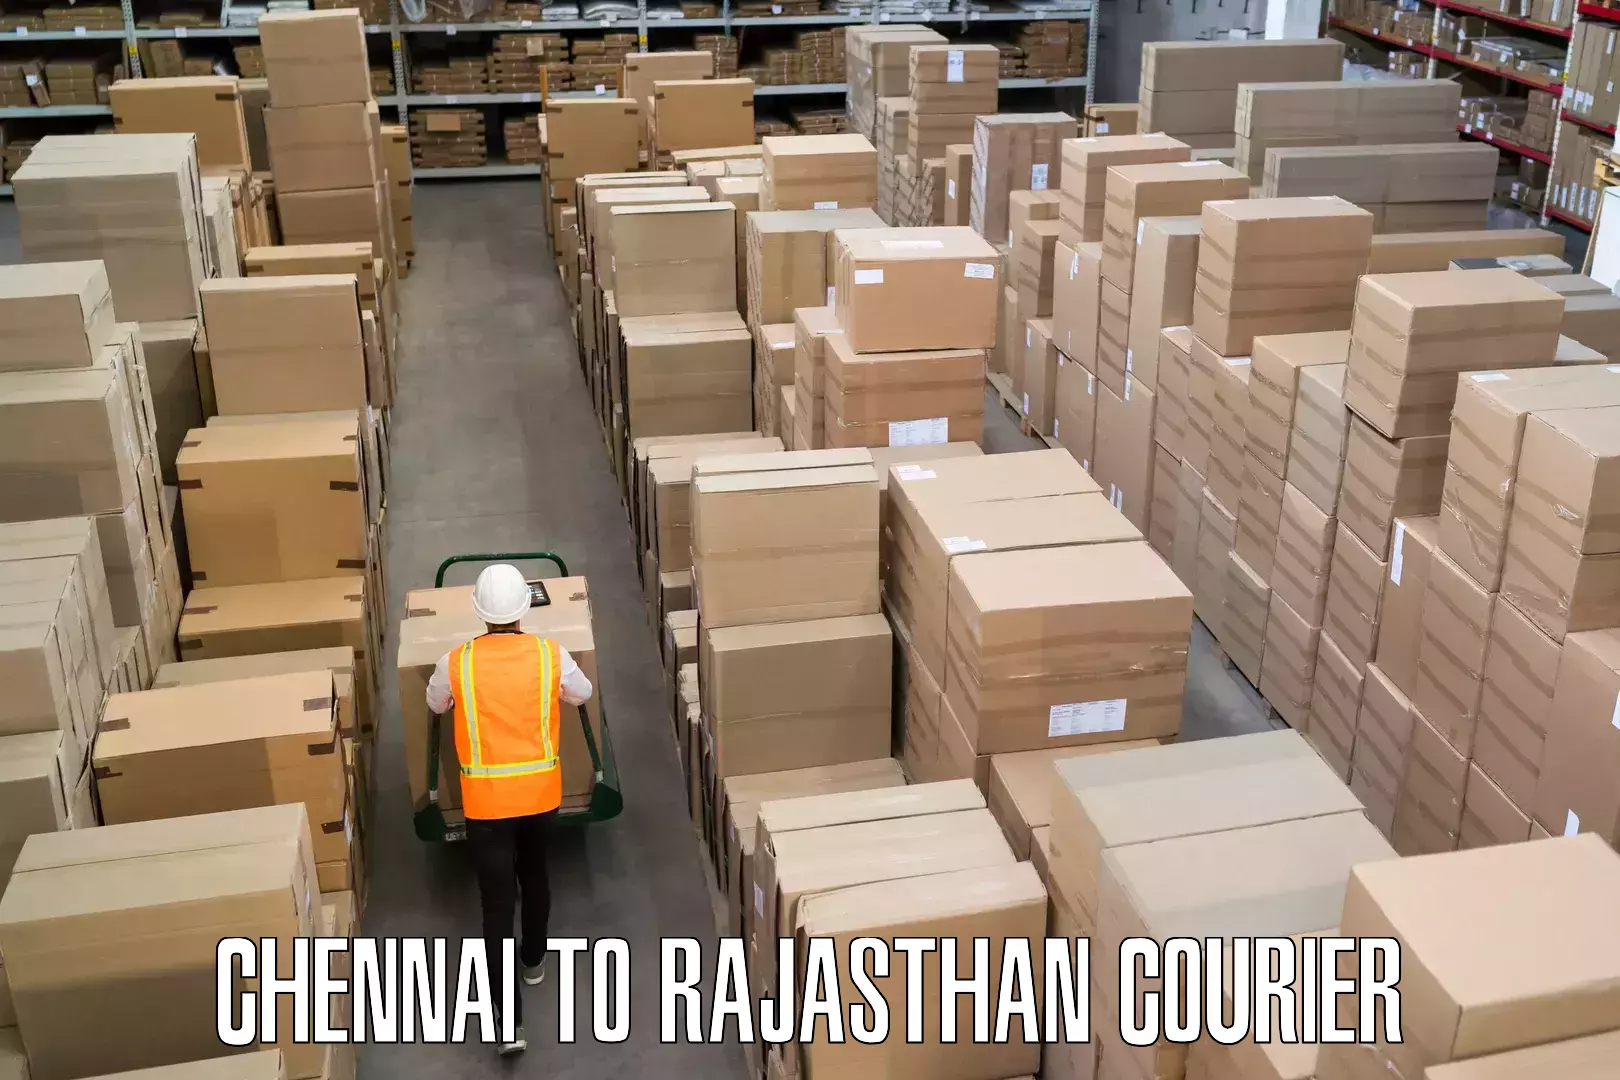 Luggage shipment tracking in Chennai to Rajasthan